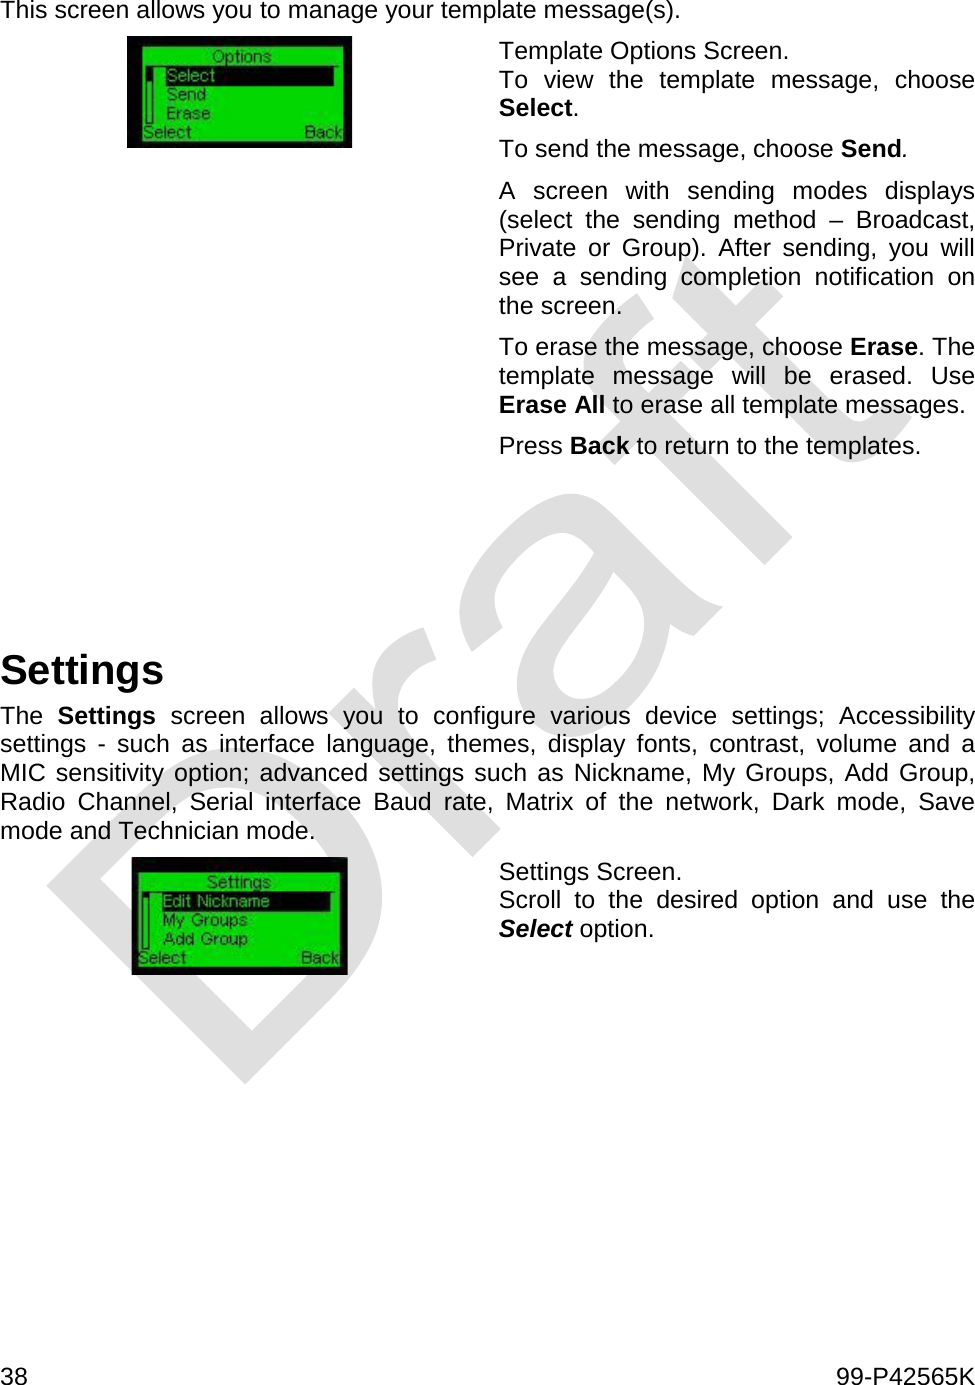  38    99-P42565K  This screen allows you to manage your template message(s).  Template Options Screen. To view the template message, choose Select. To send the message, choose Send.  A screen with sending modes displays (select the sending method –  Broadcast, Private or Group). After sending, you will see a sending completion notification on the screen. To erase the message, choose Erase. The template message will be erased. Use Erase All to erase all template messages. Press Back to return to the templates.     Settings The  Settings screen allows you to configure various device settings; Accessibility settings  -  such as interface language, themes, display fonts, contrast, volume and a MIC sensitivity option; advanced settings such as Nickname, My Groups, Add Group, Radio Channel, Serial interface Baud rate, Matrix of the network, Dark mode, Save mode and Technician mode.  Settings Screen.  Scroll to the desired option and use the Select option.  